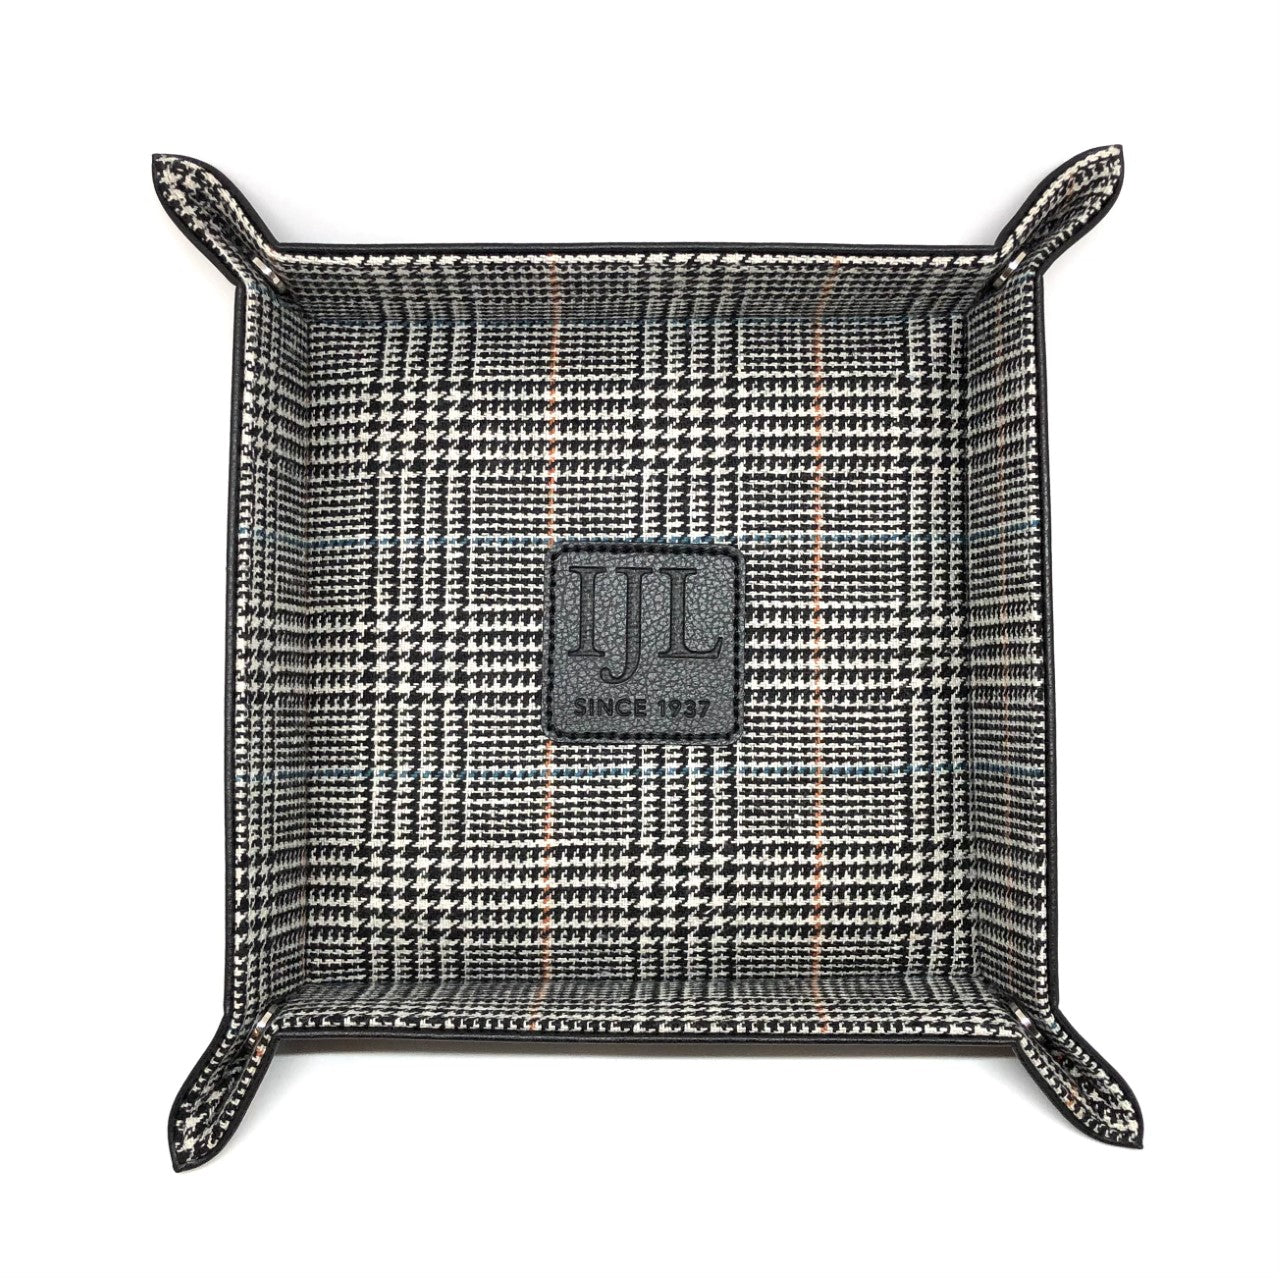 WOLF & IJL Black Leather and Plaid Fabric Accessory Tray